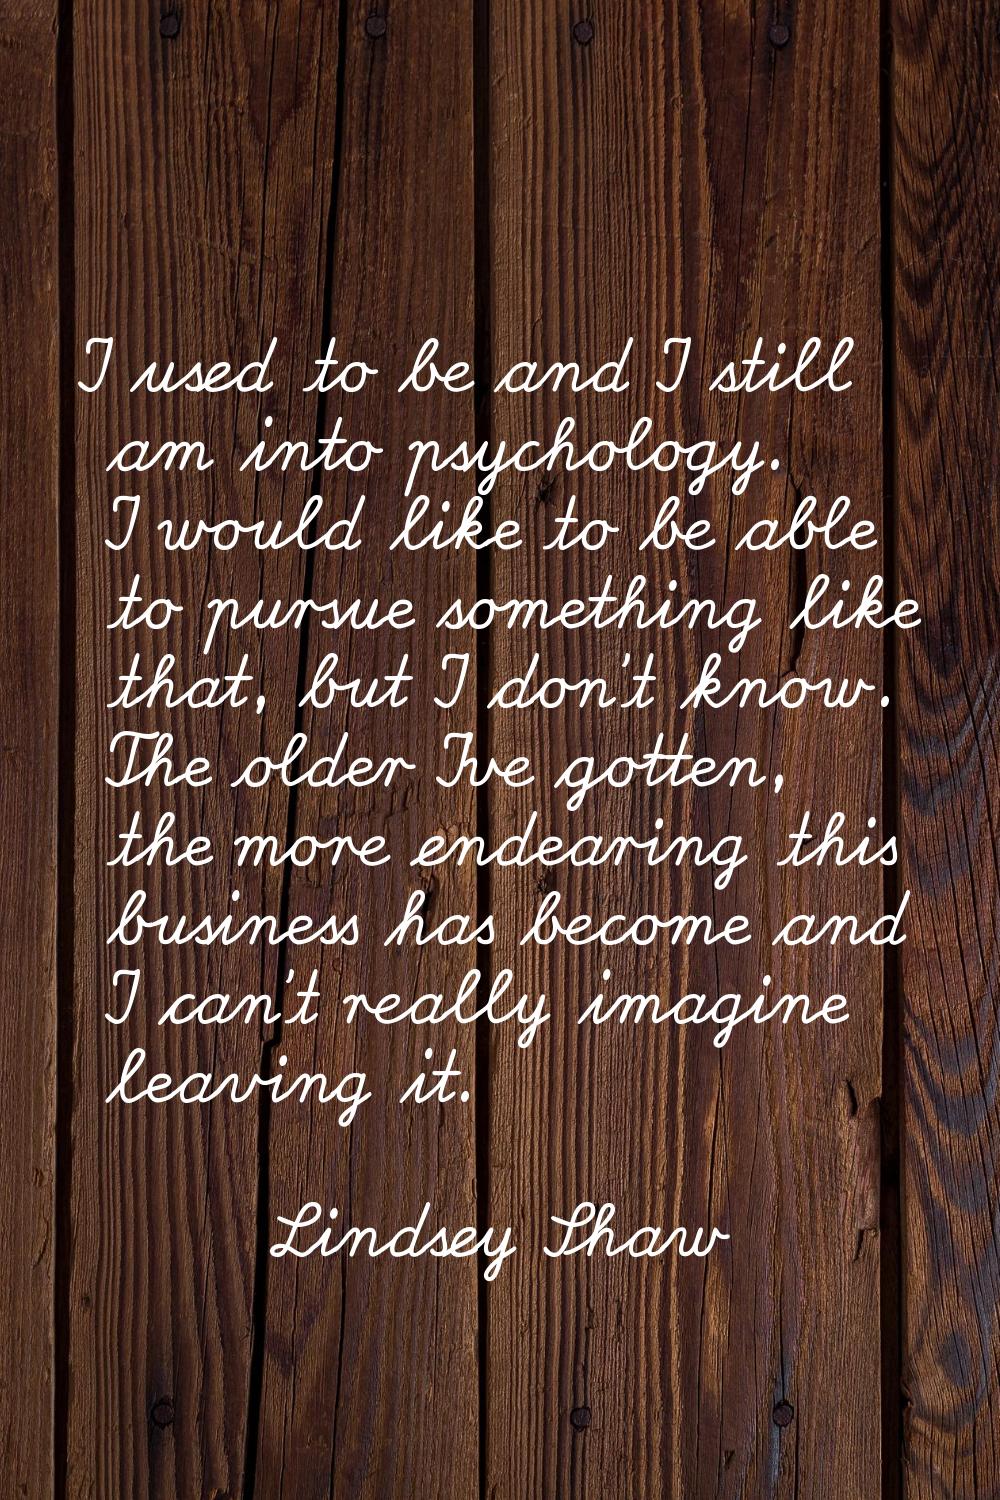 I used to be and I still am into psychology. I would like to be able to pursue something like that,